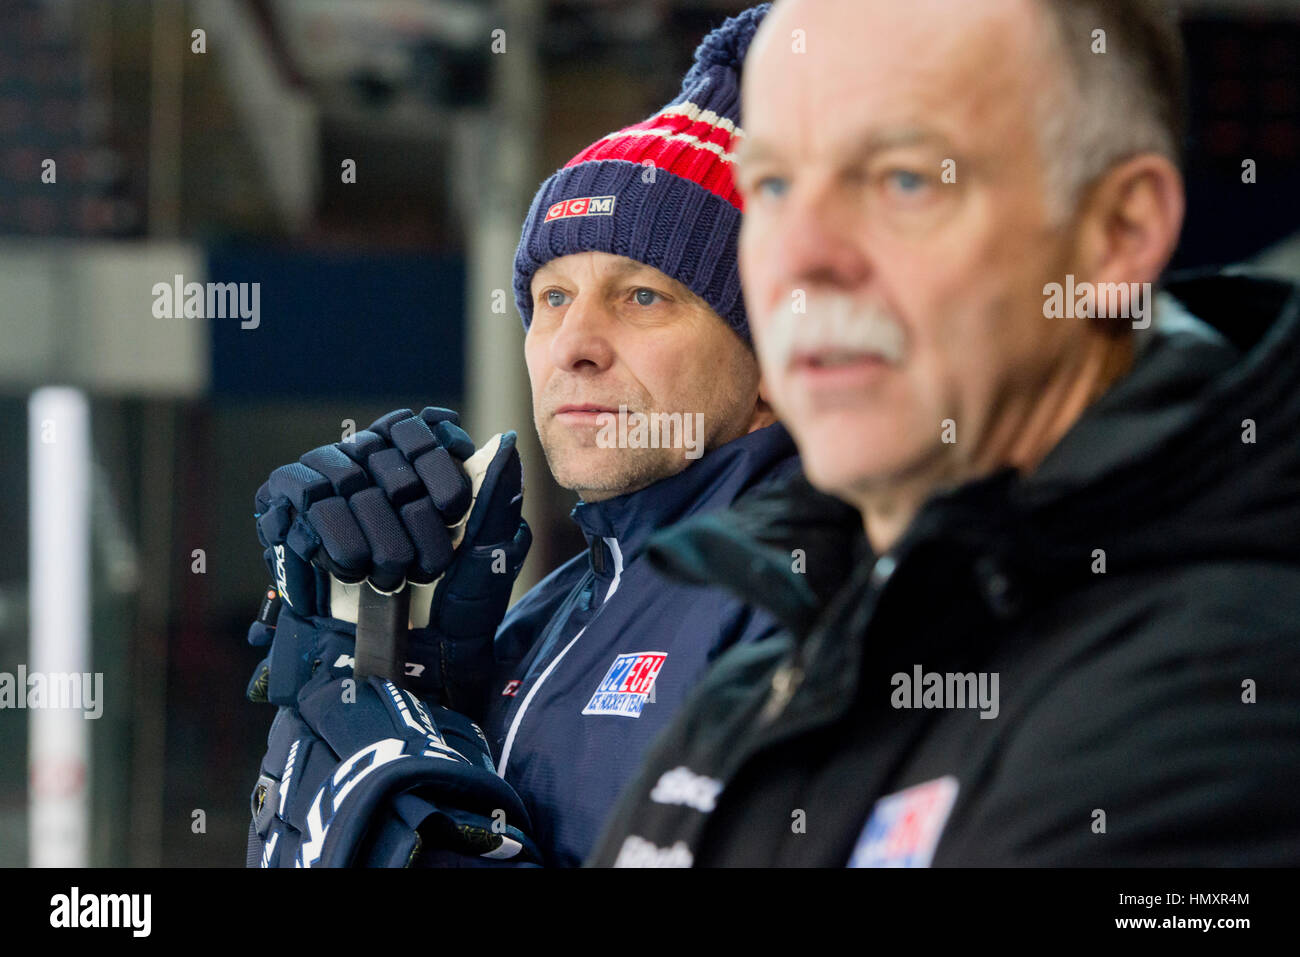 Prague, Czech Republic. 07th Feb, 2017. The Czech national ice-hockey team's coaches, Josef Jandac (left) and Slavomir Lener (right) during the training session prior to the February Sweden Games in Gothenburg in Prague, Czech Republic, February 7, 2017. Sweden Games, the third part of the European Hockey Tour (EHT) series, will take place on February 9-12. Credit: Vit Simanek/CTK Photo/Alamy Live News Stock Photo